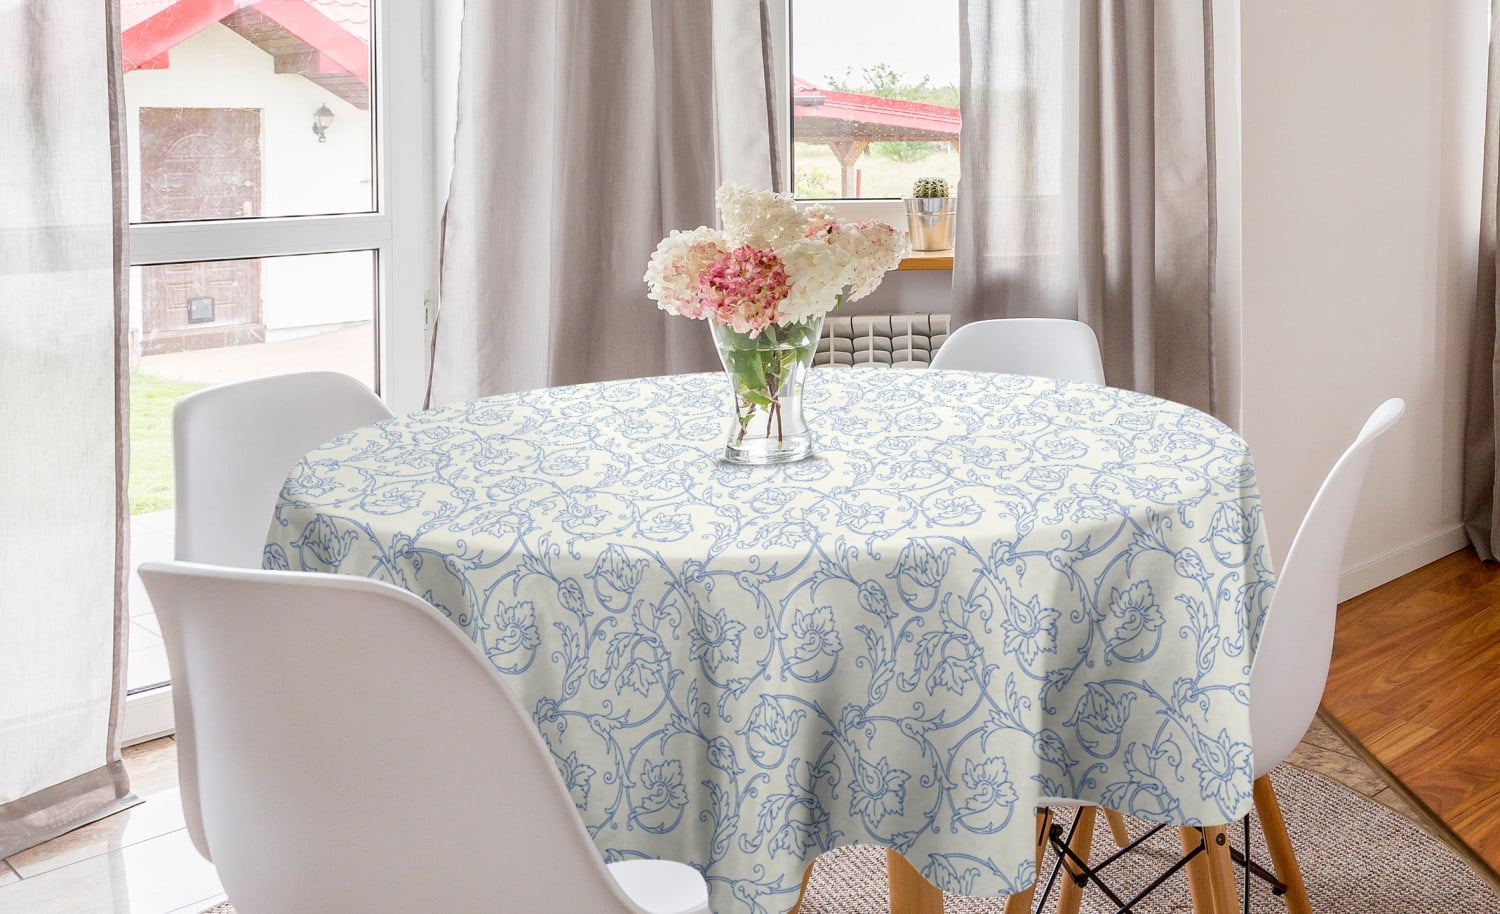 Retro Jacquard Table Runner Floral Tablecloths Kitchen Dining Home Decor Country 